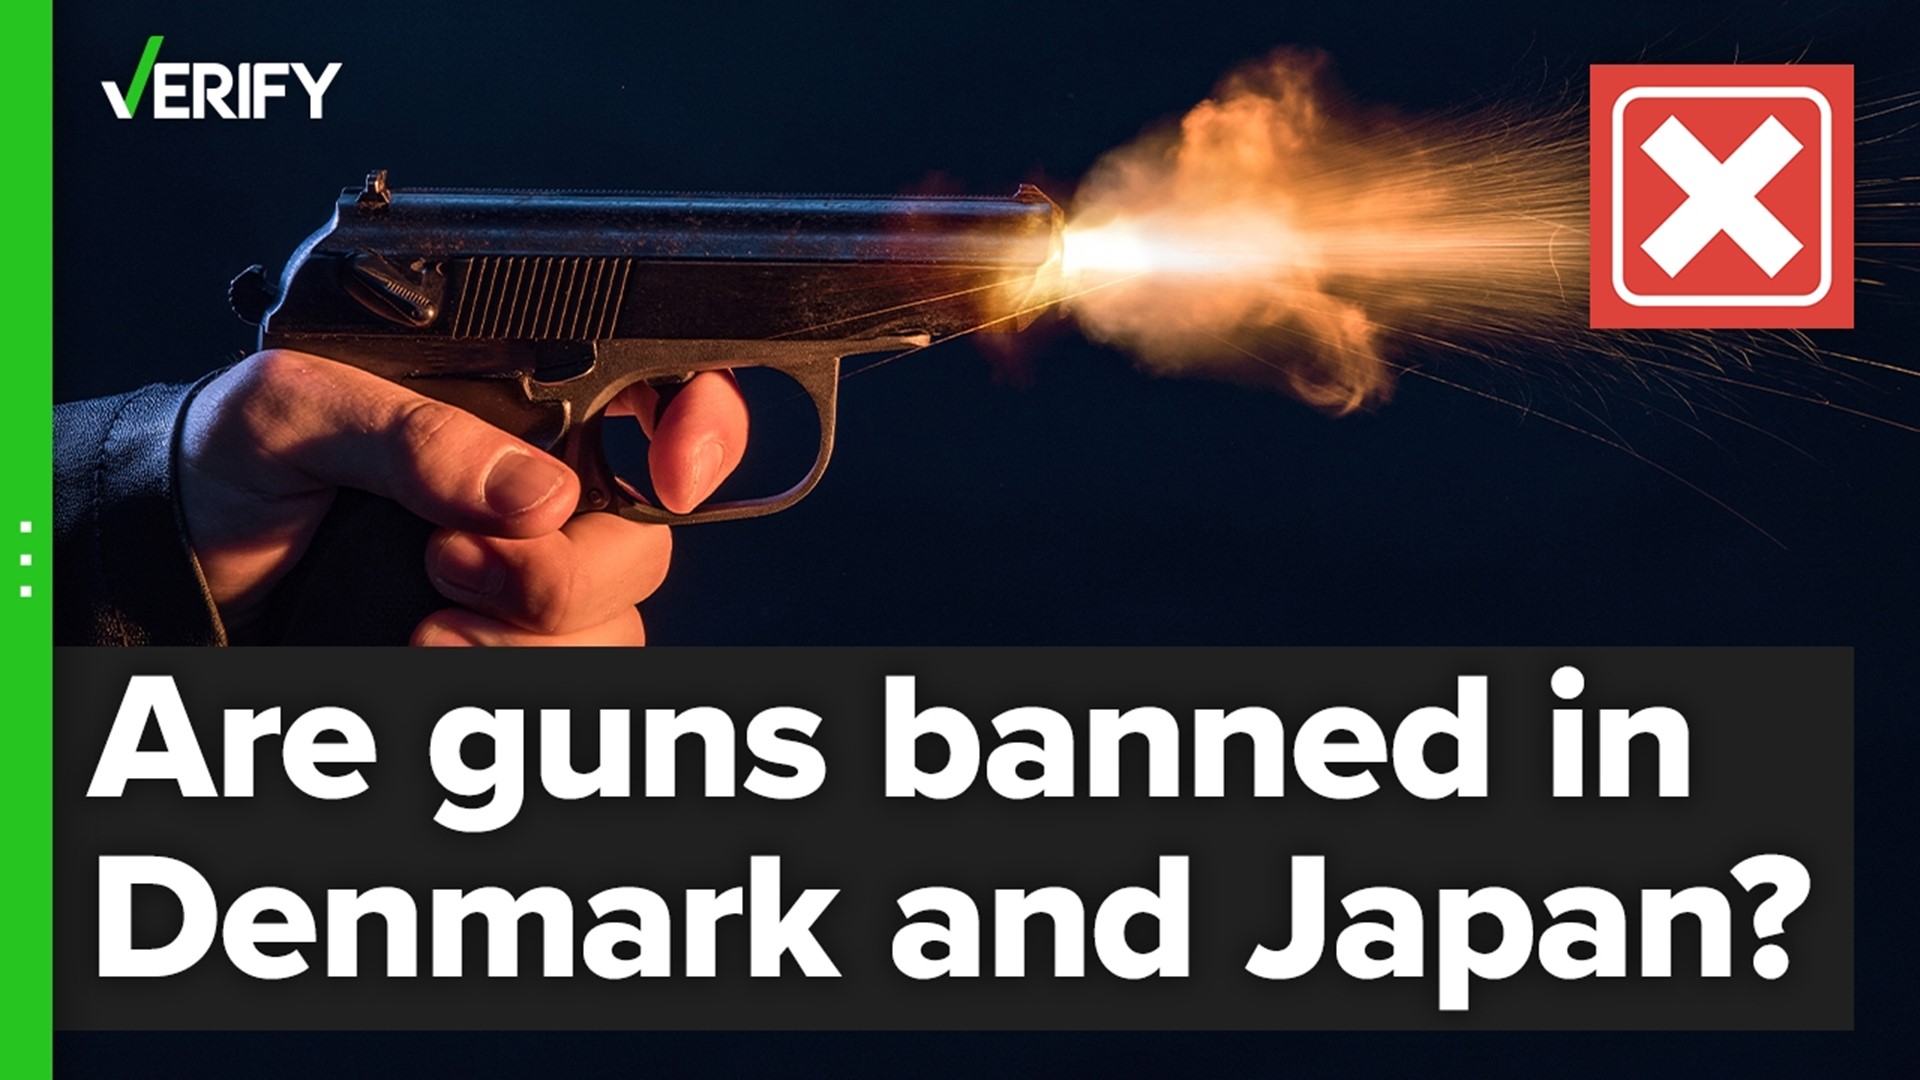 Are guns completely banned in Japan and Denmark? The VERIFY team confirms this is false.